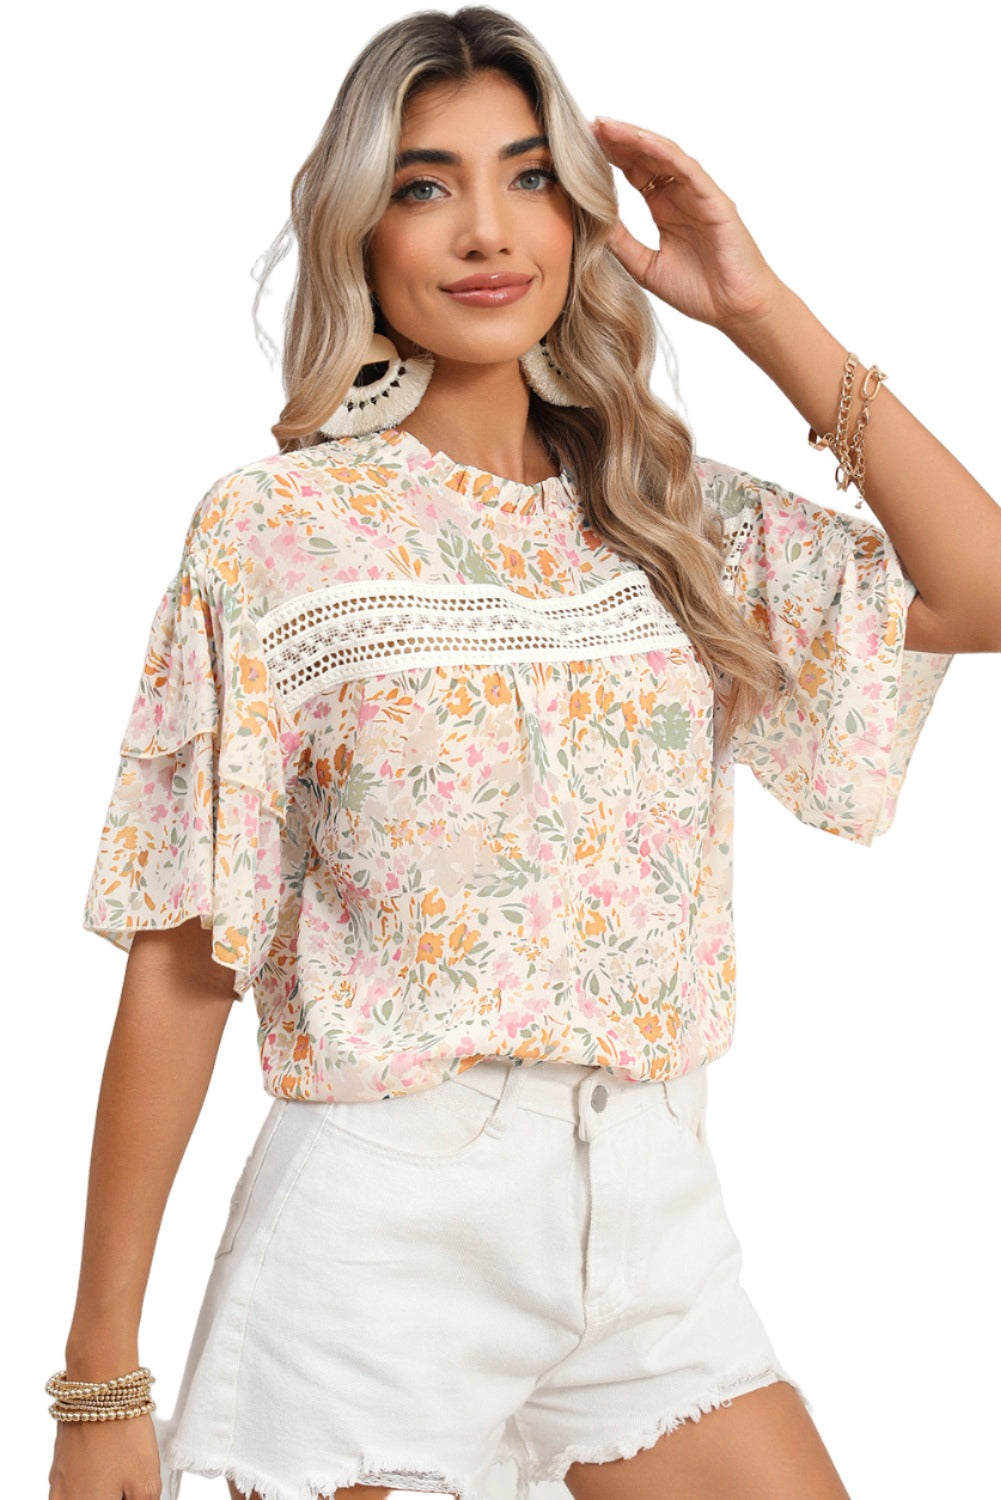 Multicolor Floral Print Wide Batwing Sleeves Blouse